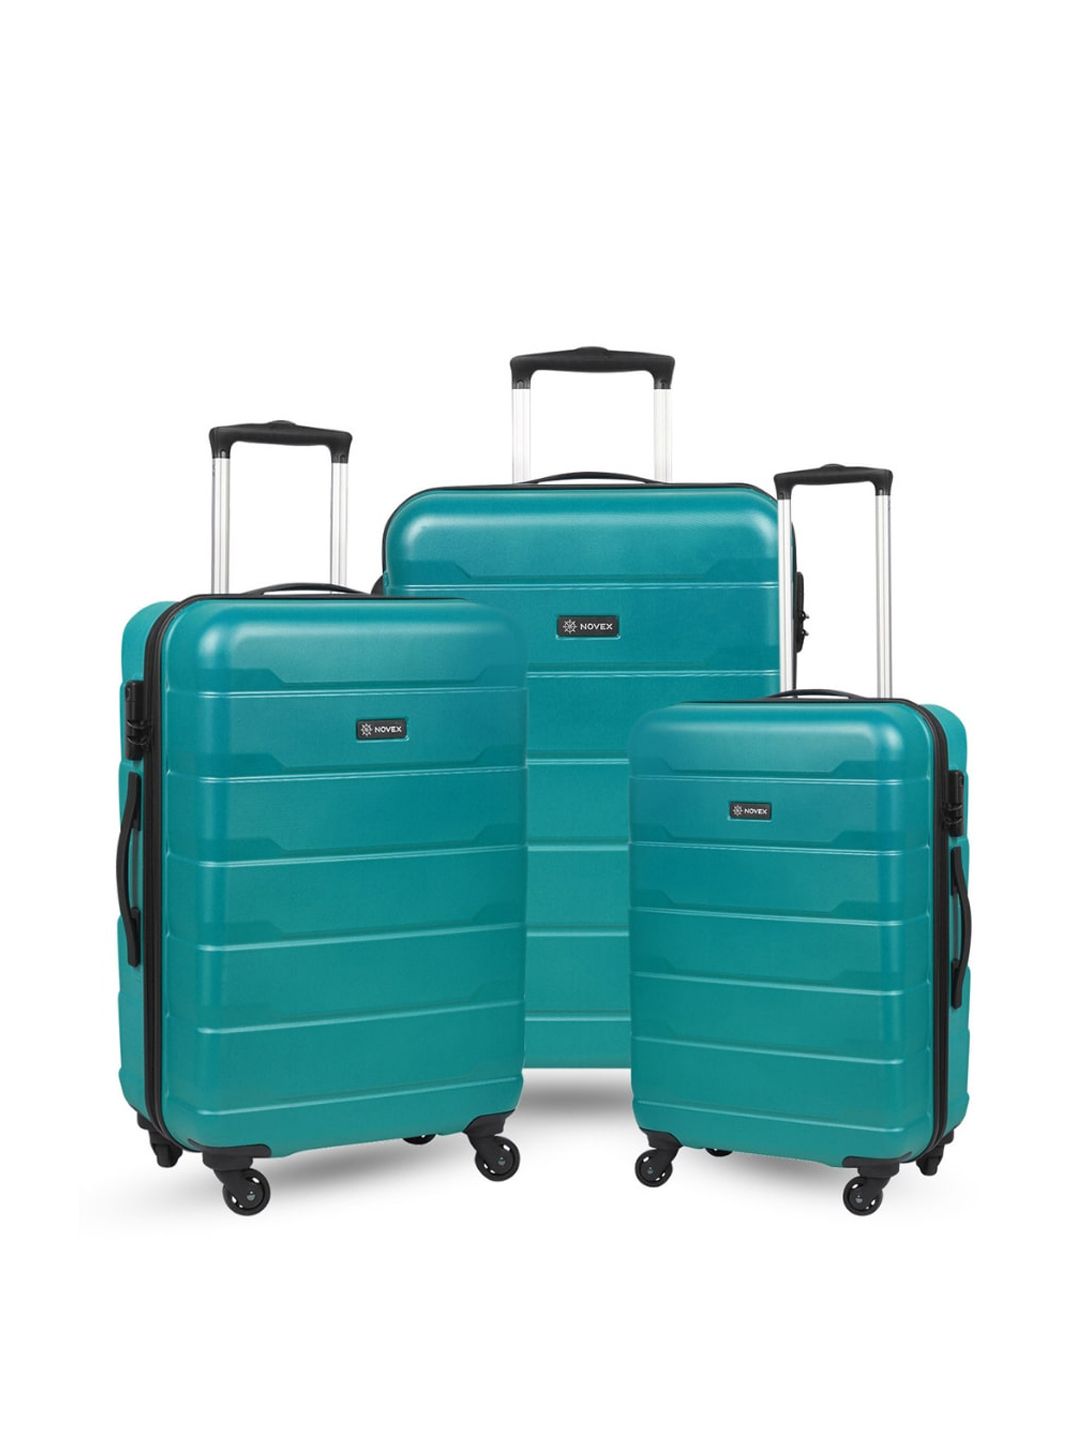 NOVEX Unisex Set Of 3 Sea-Green Textured Hard-Sided Trolley Suitcases Price in India